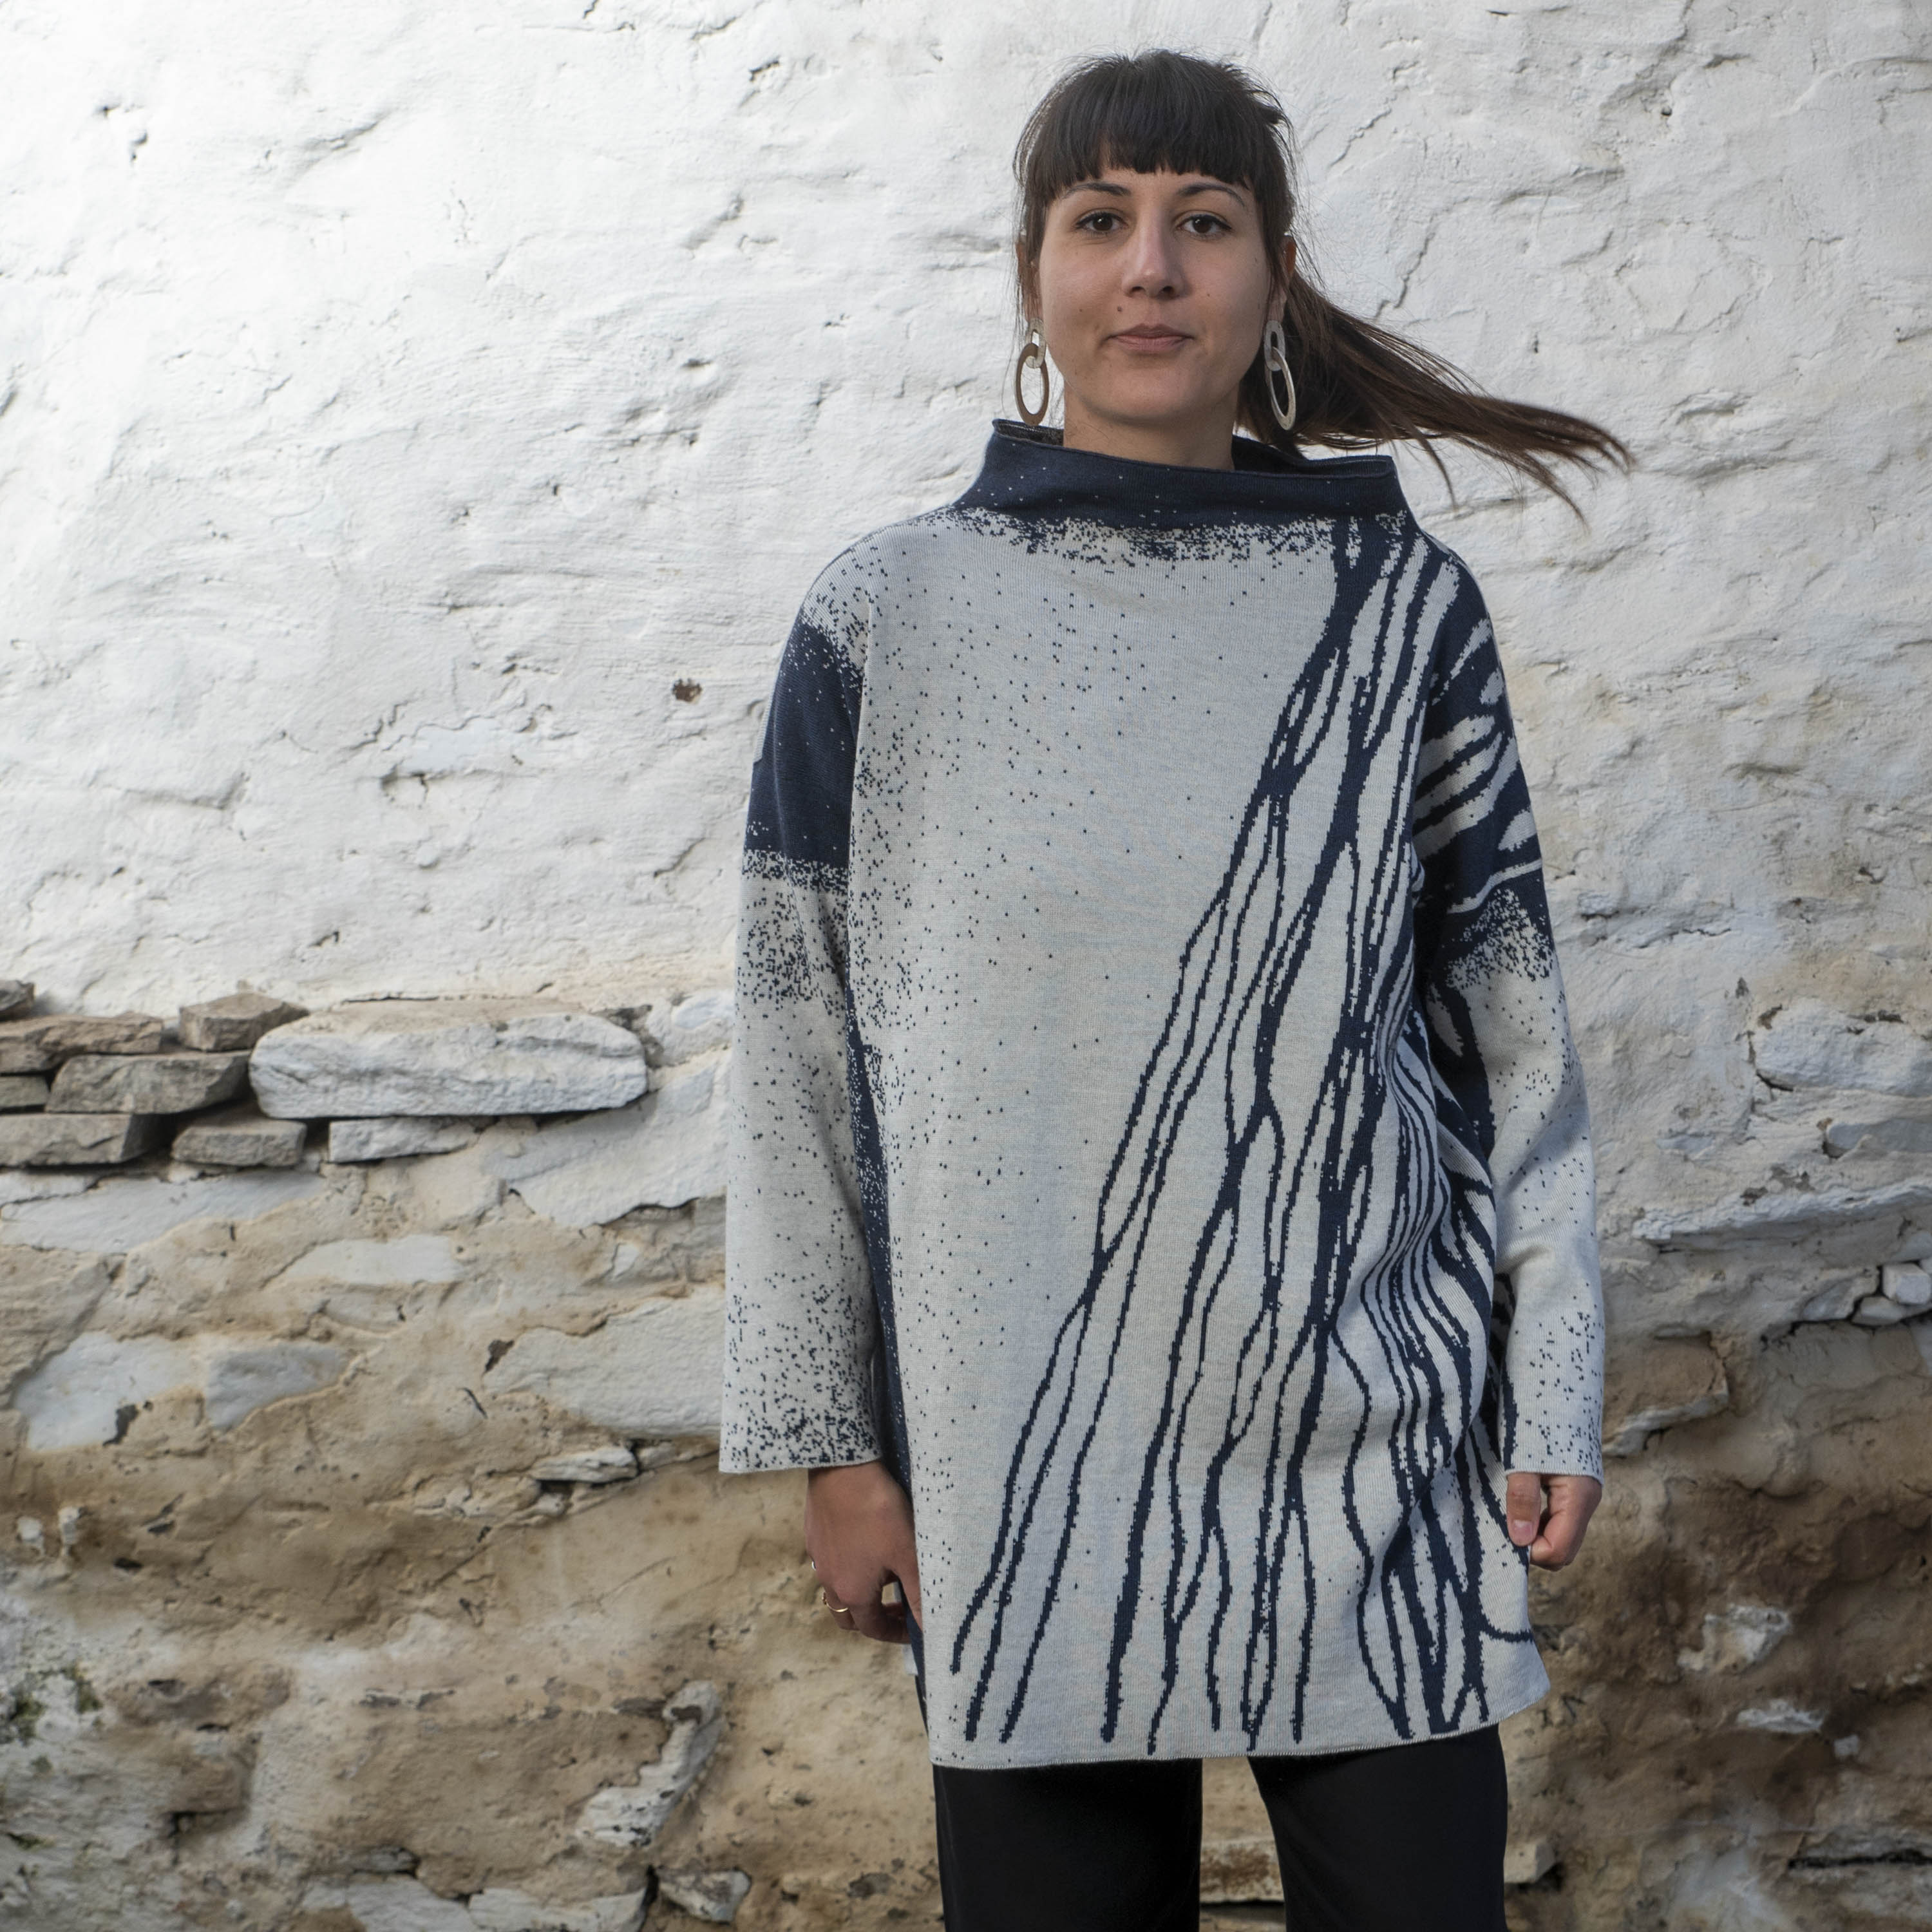 In a stone built, rustic Shetland building with whitewashed walls a woman with long dark hair tied back wears a longline tunic jumper in an abstract linear pattern. It is off white and navy. She wears black trousers and swings here hair so that her pony tail flies out